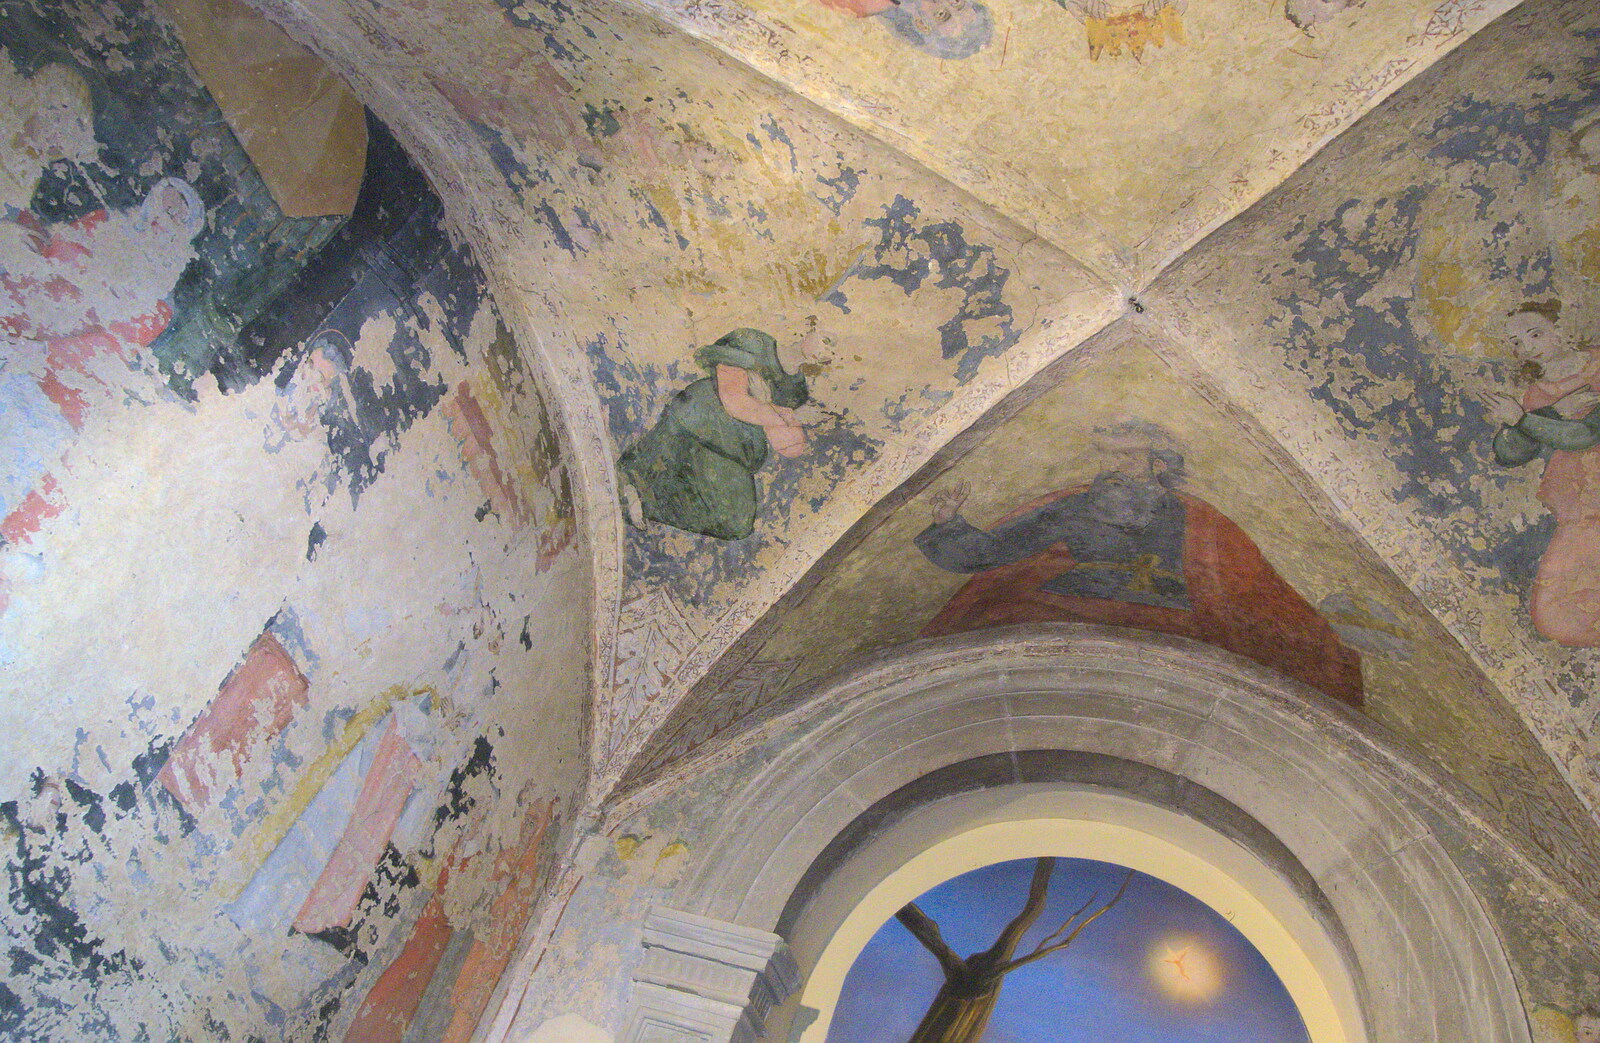 Old mediaeval wall paintings from La Verna Monastery and the Fireflies of Tuscany, Italy - 14th June 2013